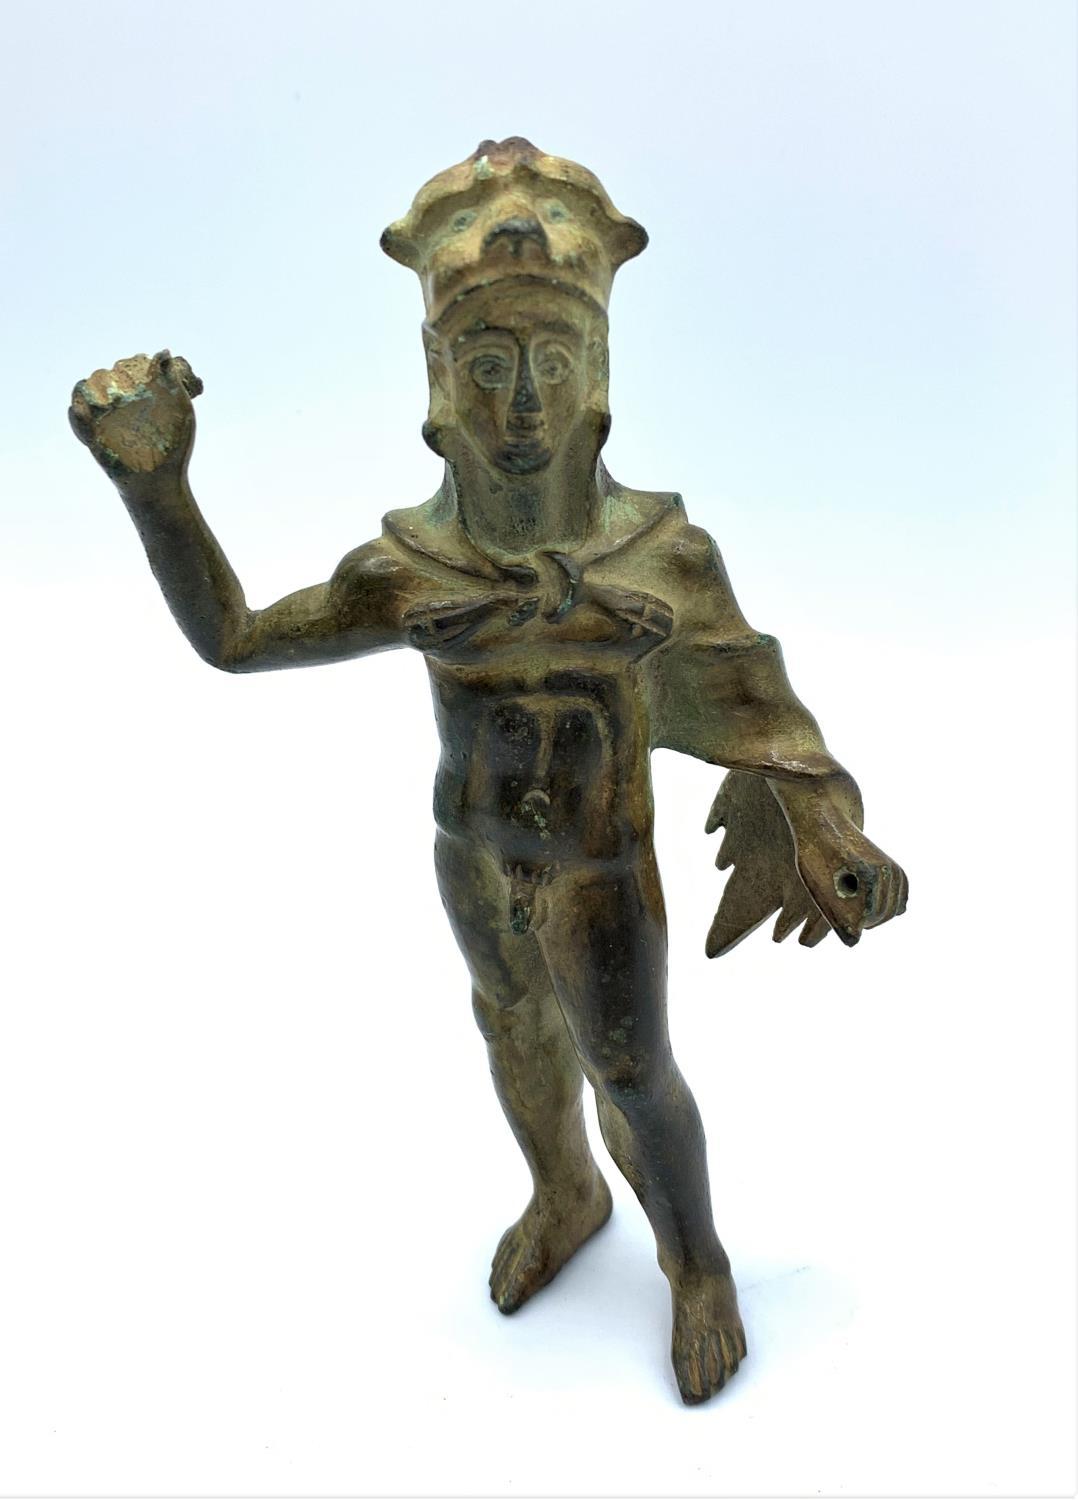 Early depiction of the lizard God in bronze, weighs 212g and is 12cm high.